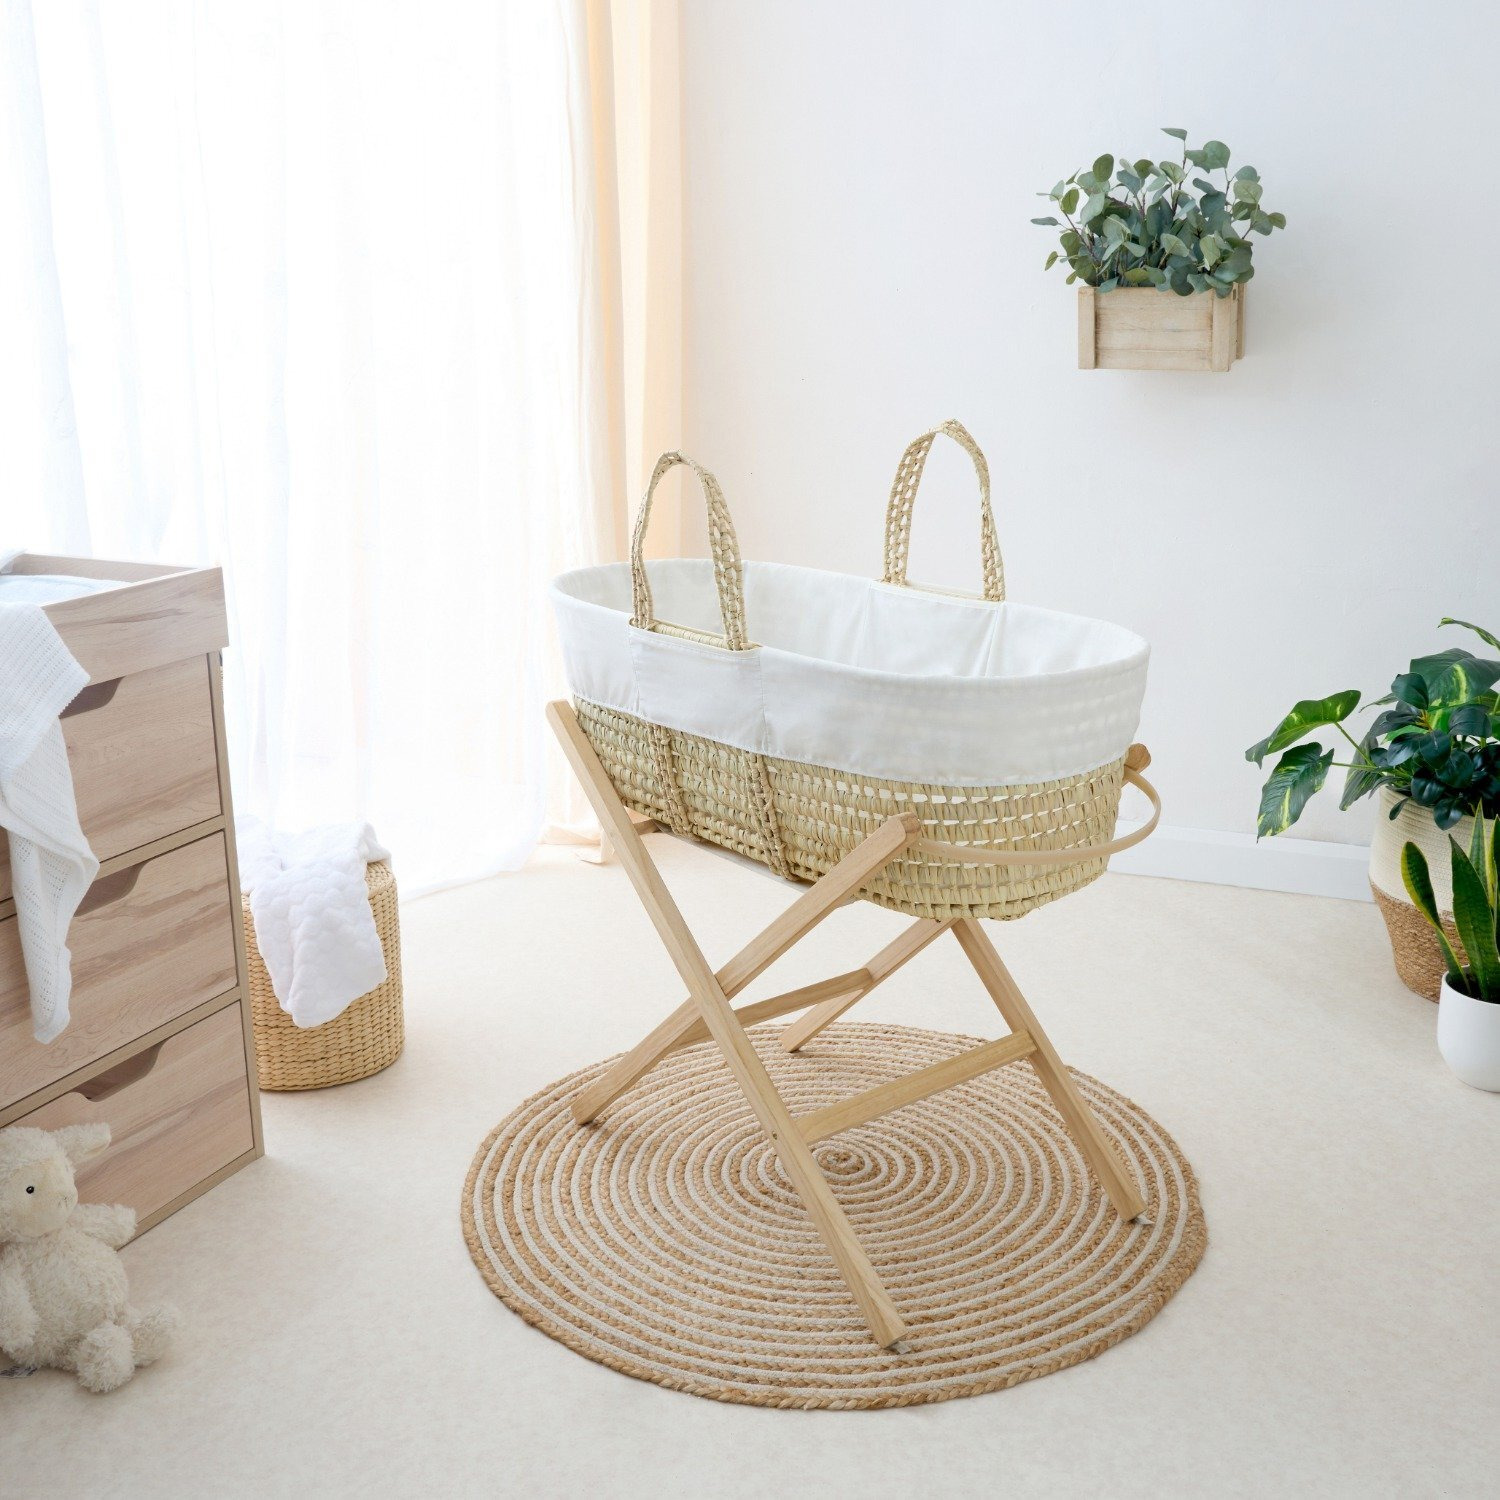 Clair de Lune Essentials Moses Basket With Natural Stand - image 1